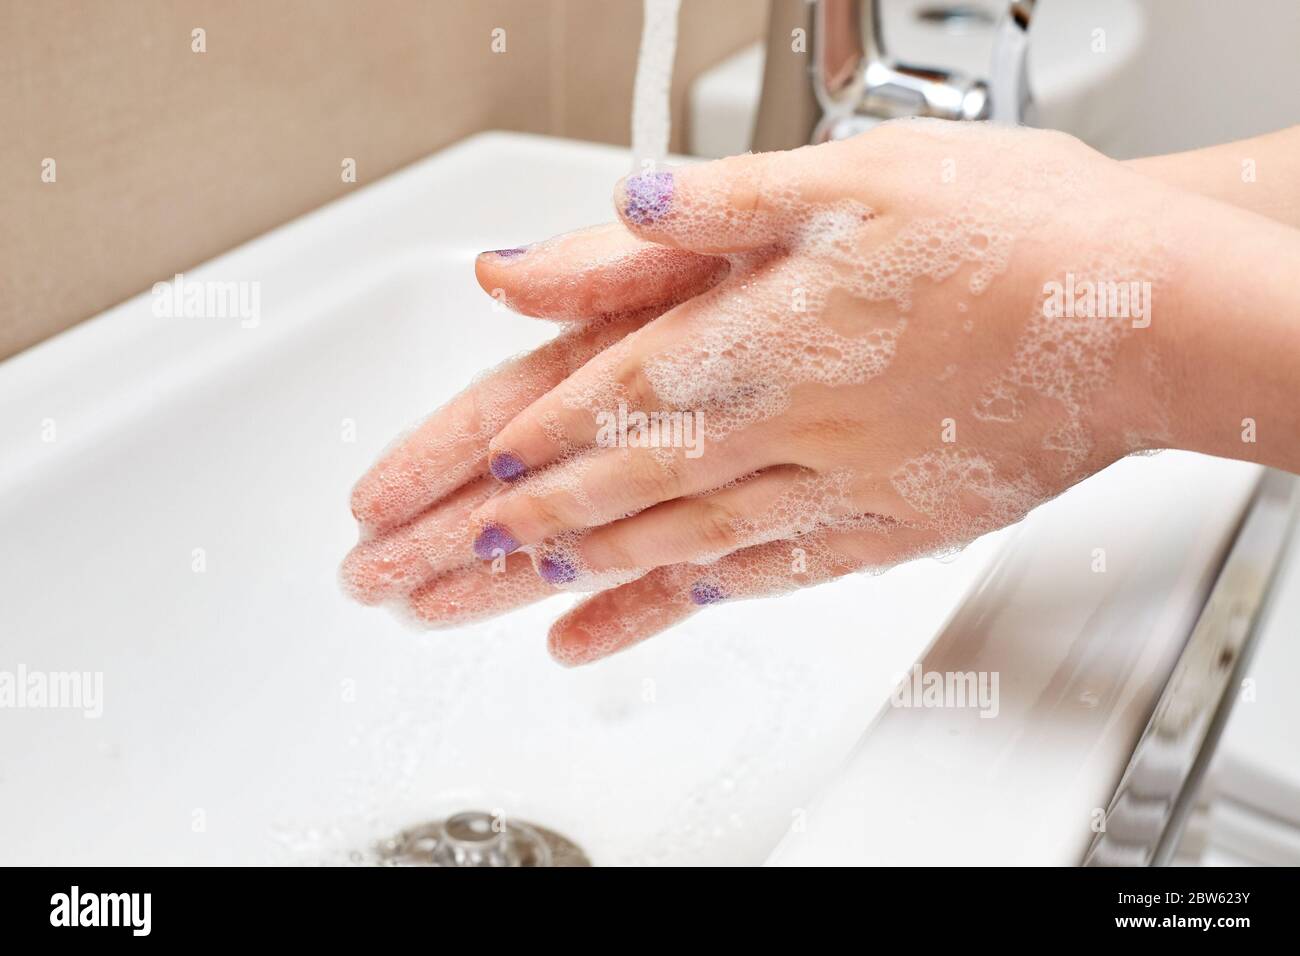 White Child Washing Hands with Soap and Running Water over Sink, Fingers Together Stock Photo